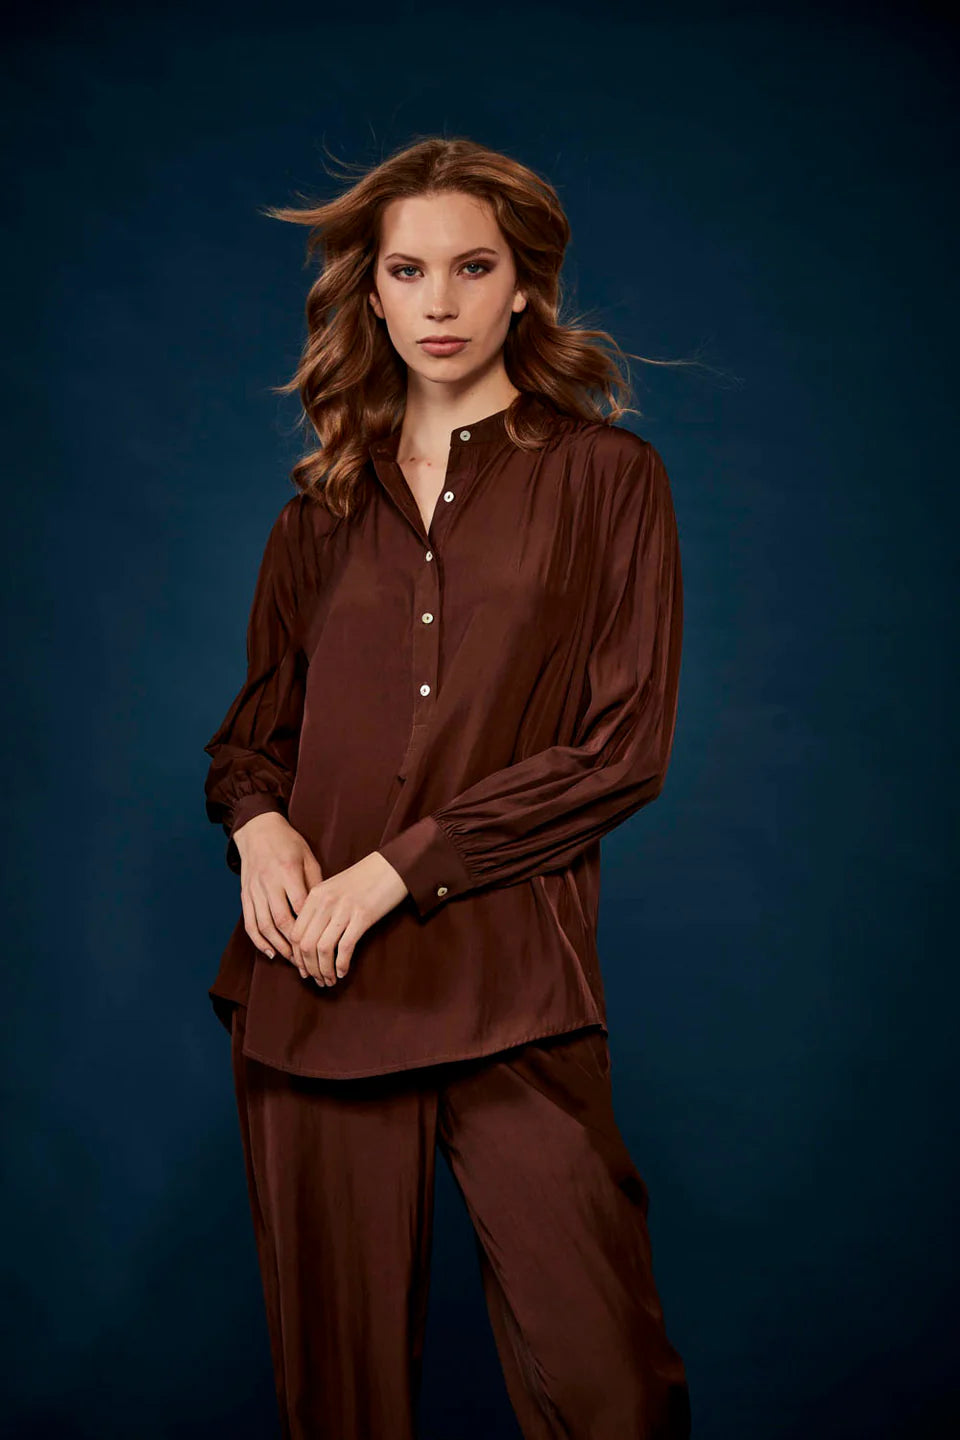 Glide by Verge Seattle Shirt - Chocolate